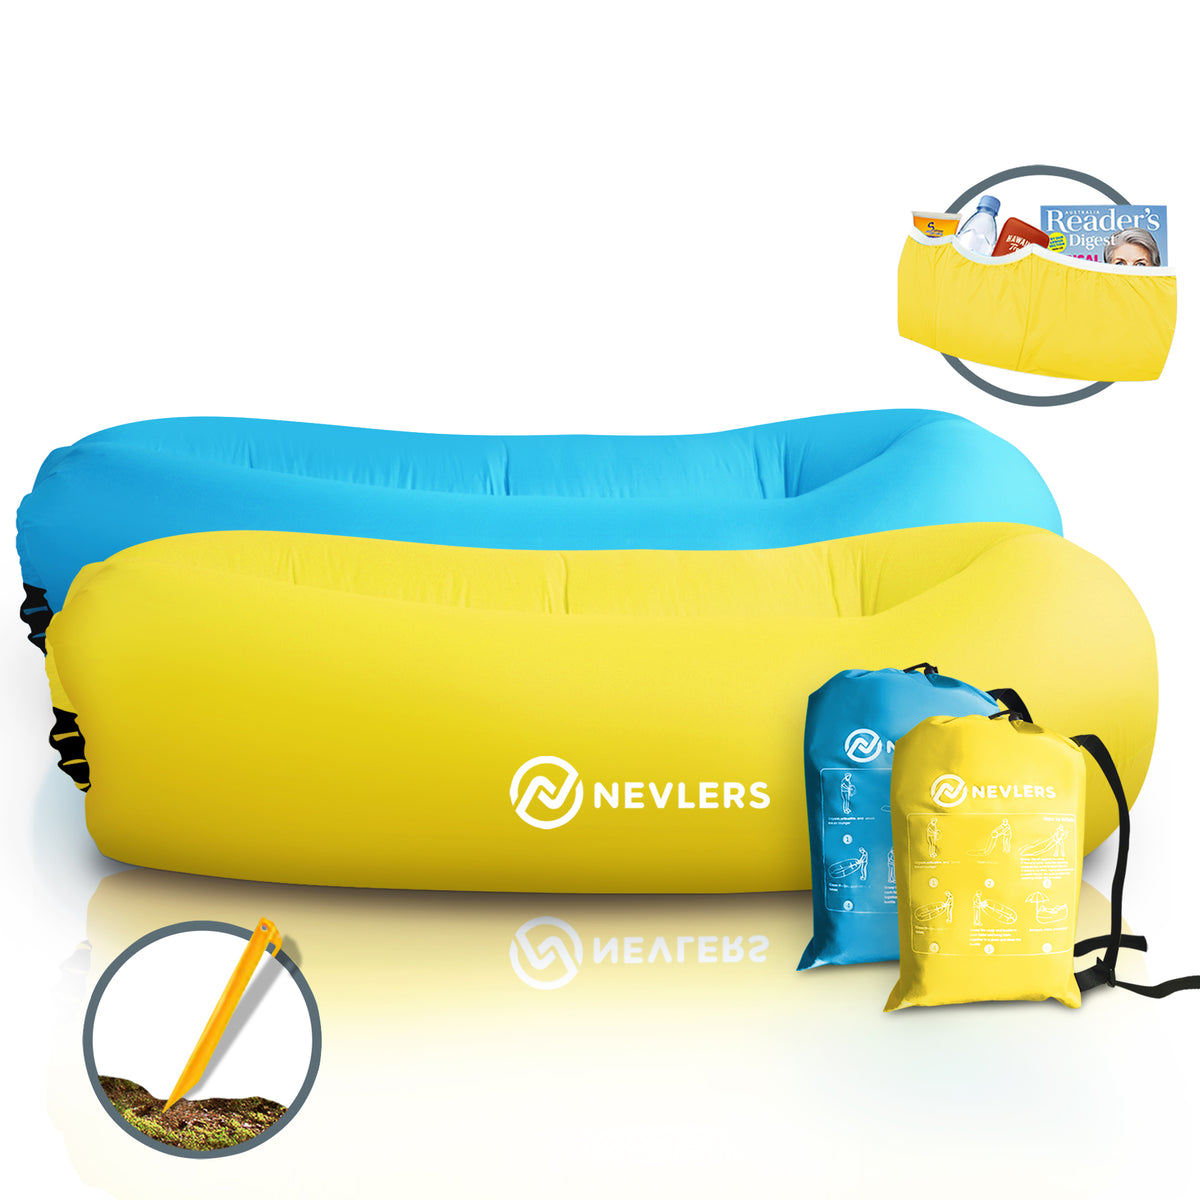 Inflatable Loungers - Blue/Yellow - 2 Pack